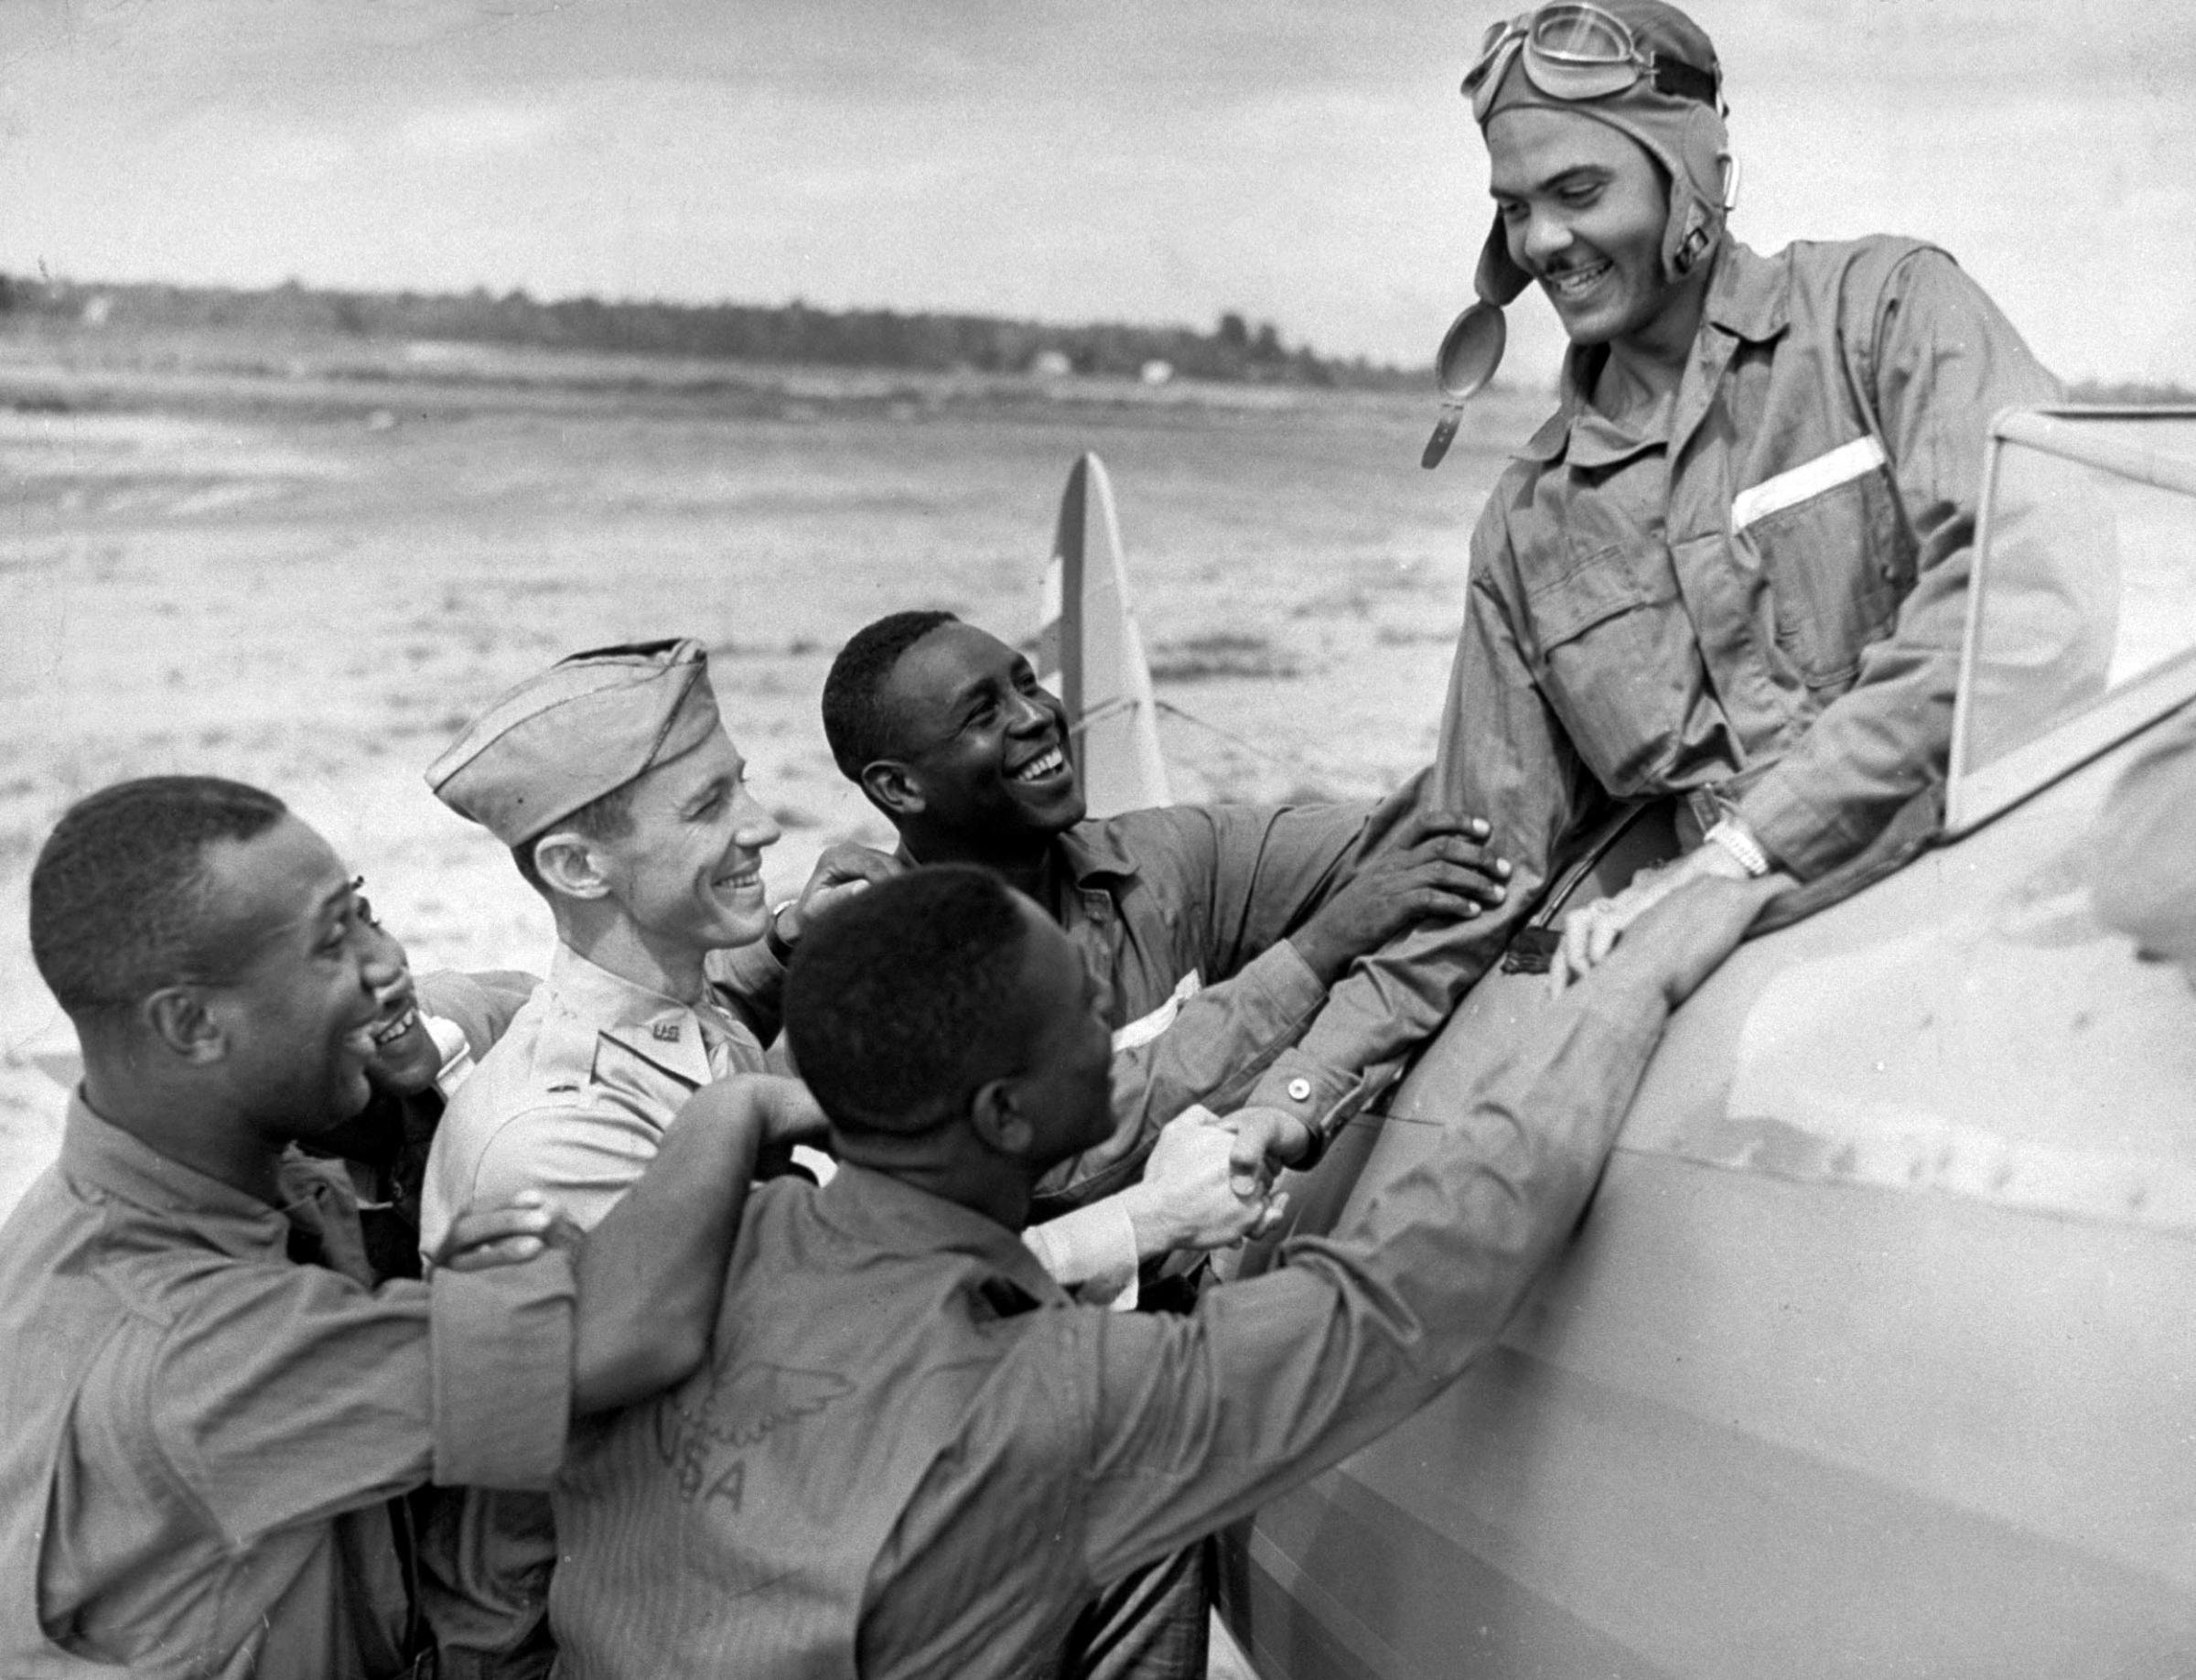 Captain Benjamin O. Davis Jr., of US Army Air Corps 99th Pursuit Squadron, in cockpit, greeted by other cadets at flight-training school, 1942.